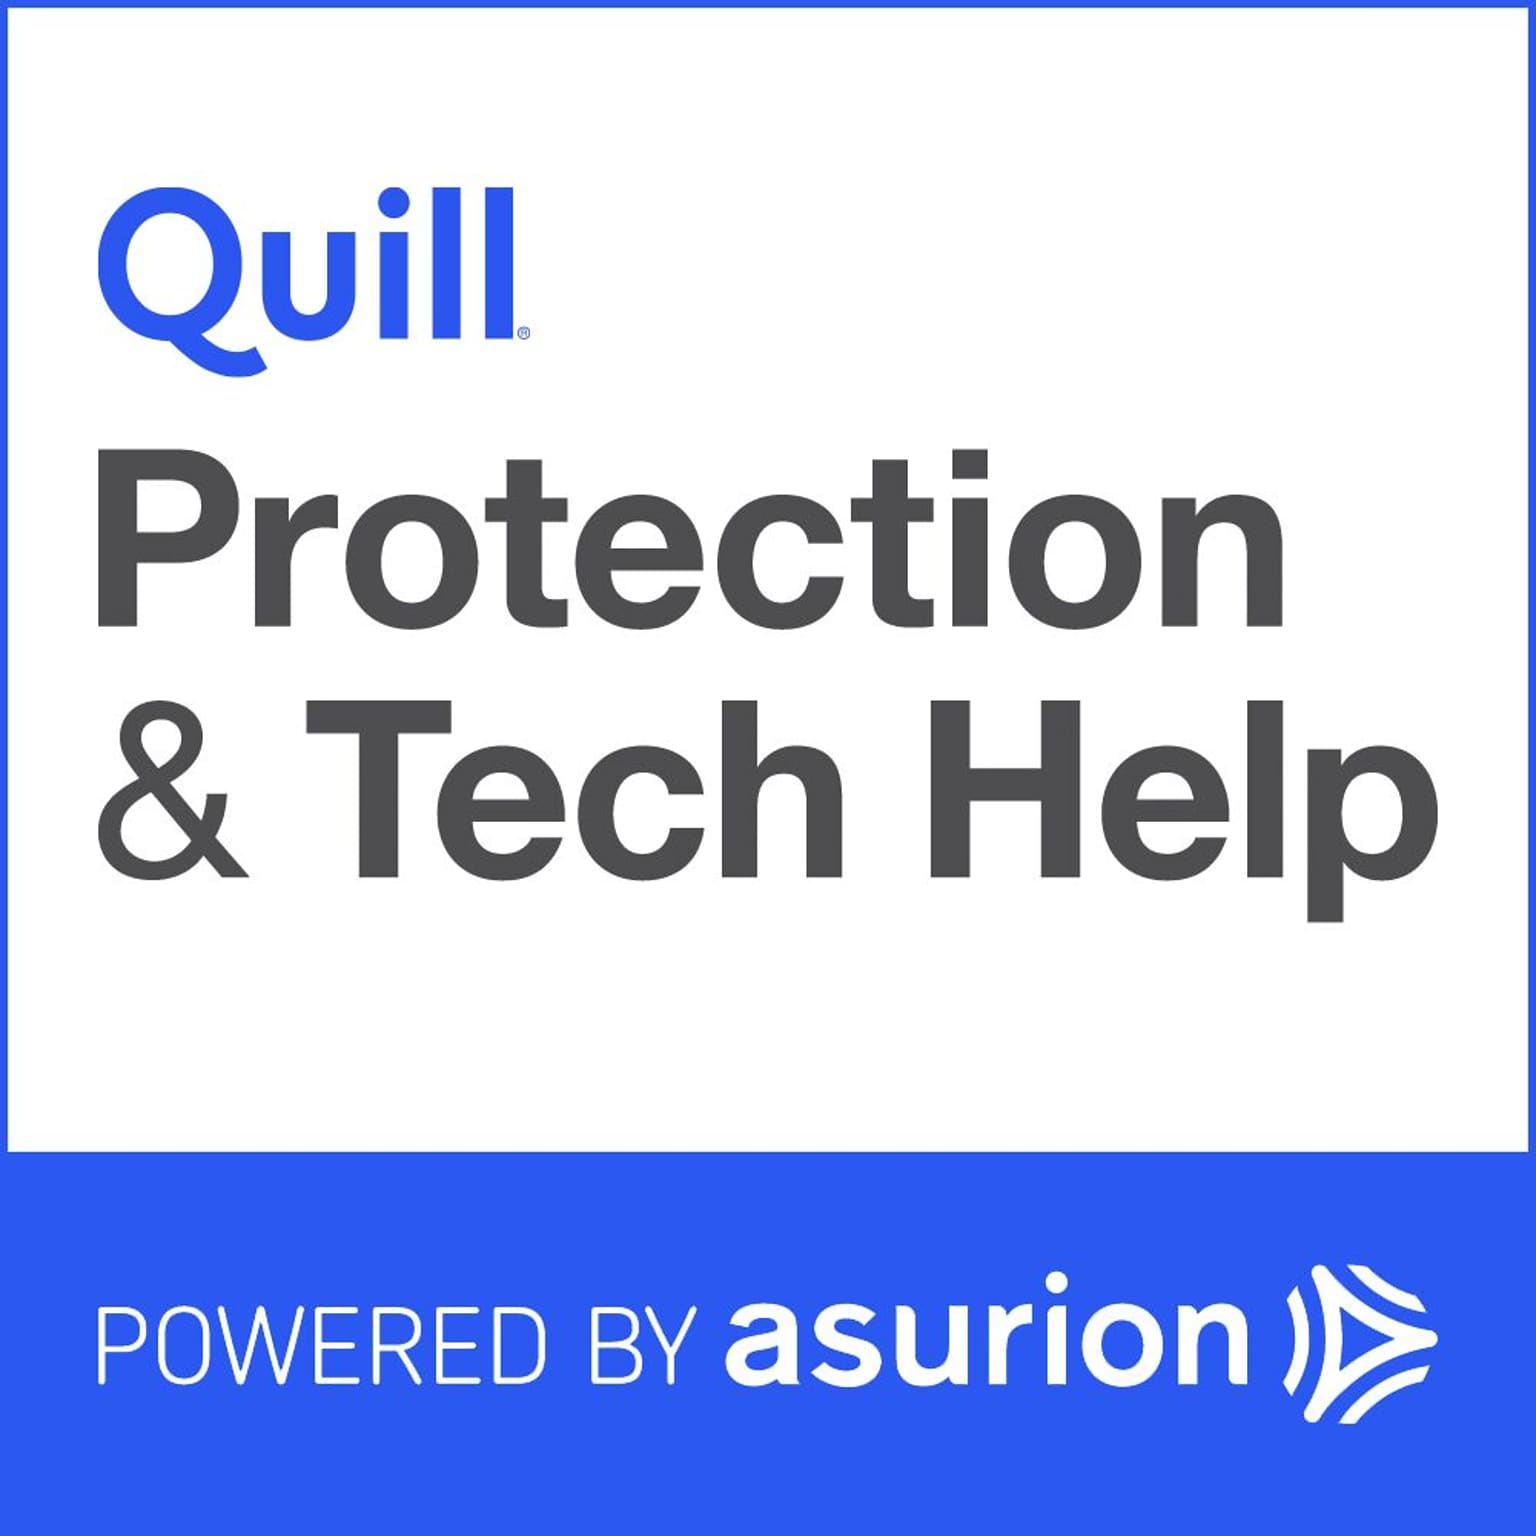 Quill.com 2 Year Connected Device Protection & Tech Help Plan $0-$49.99